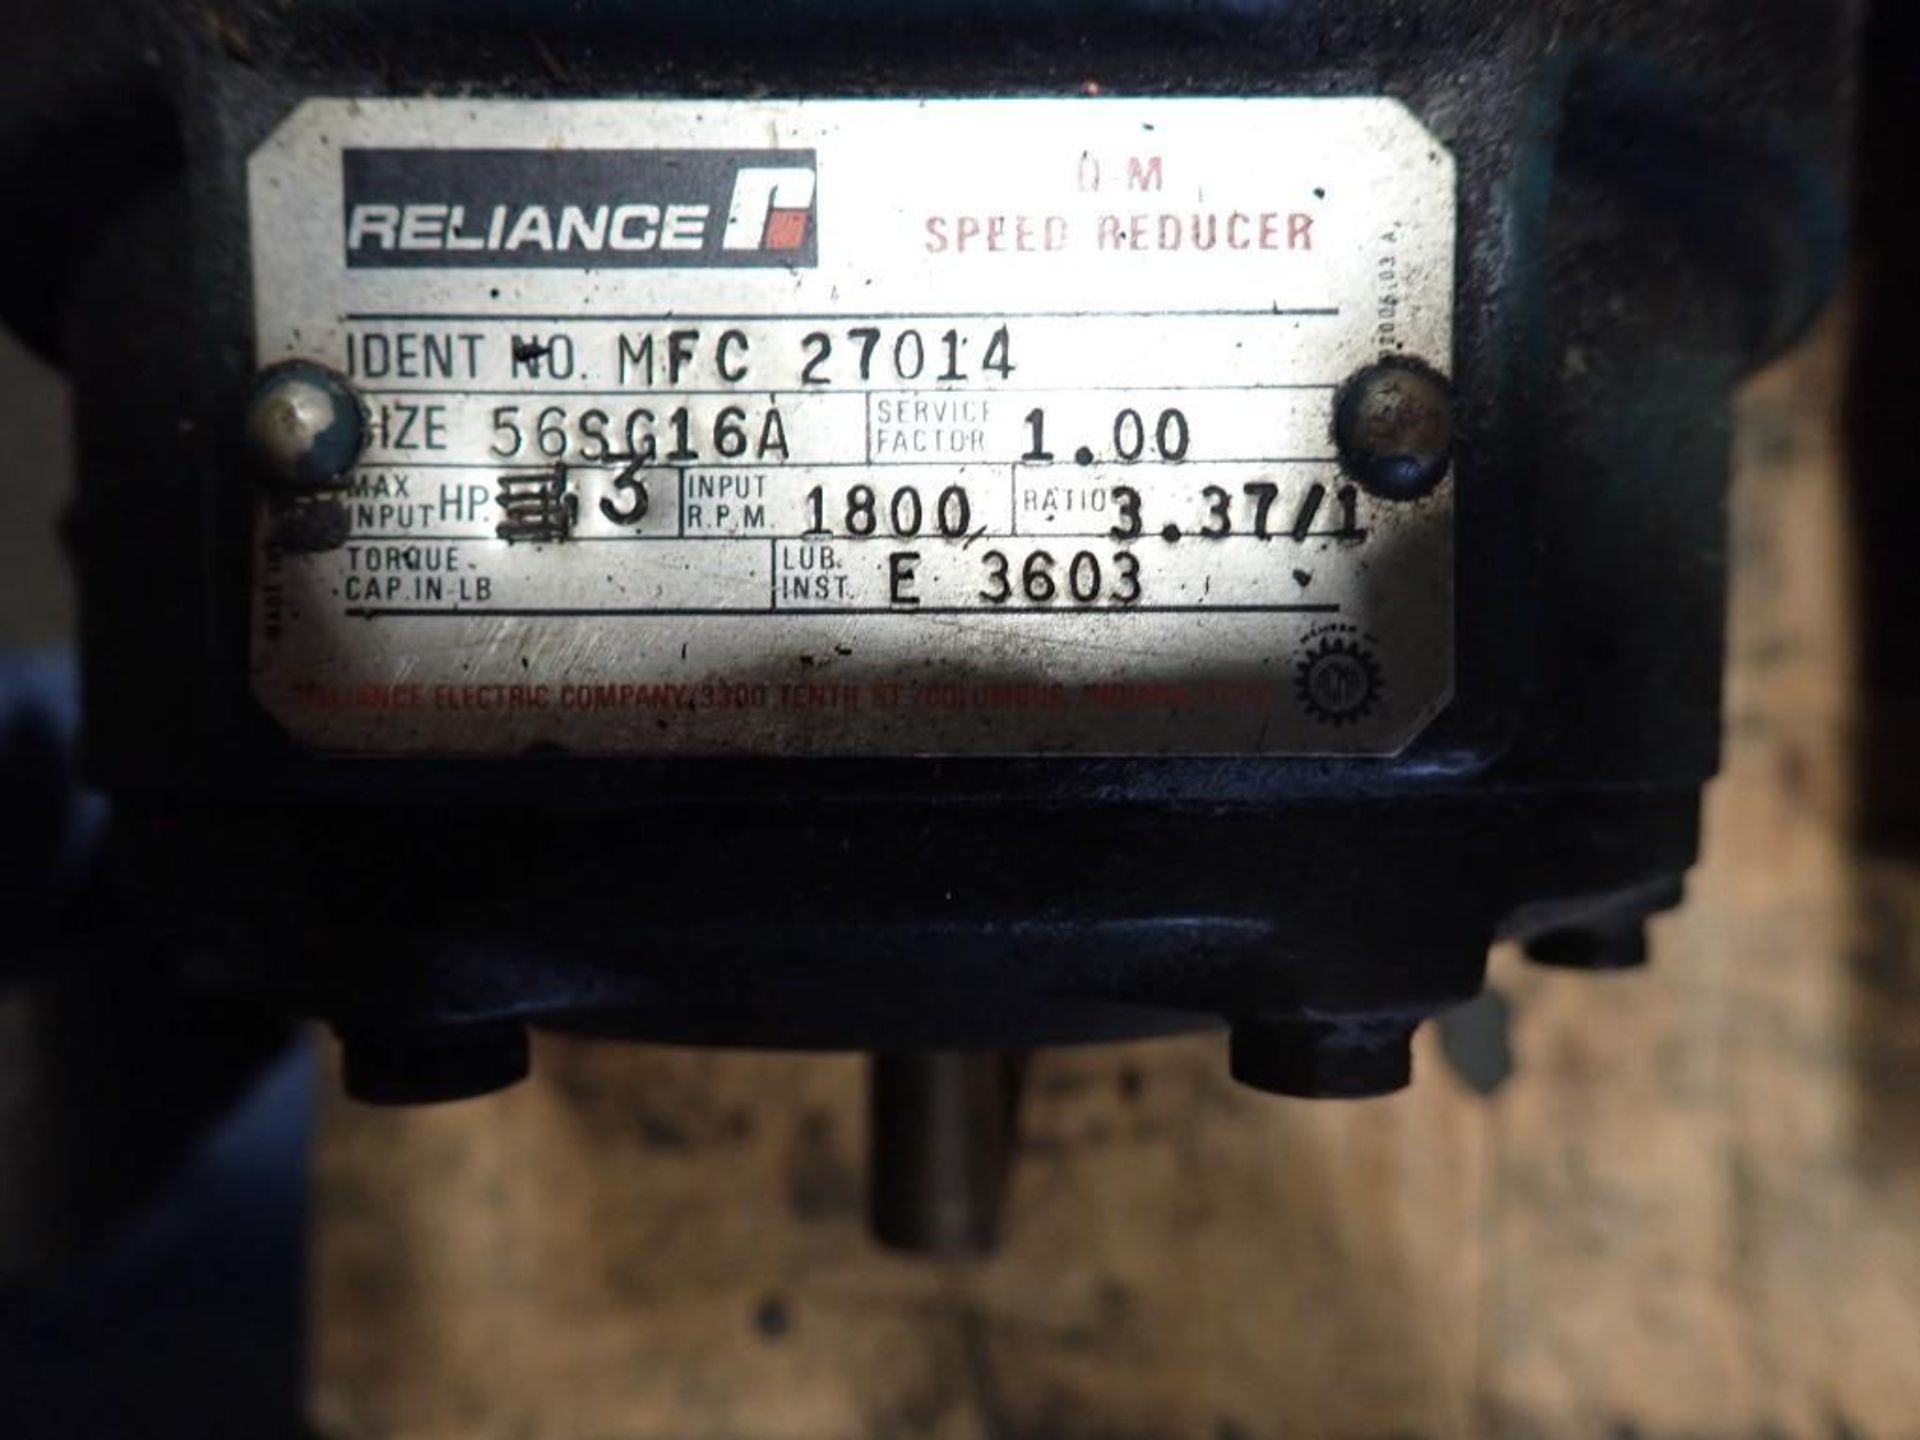 Reliance Electric Motor w/ Speed Reducer - Image 4 of 5